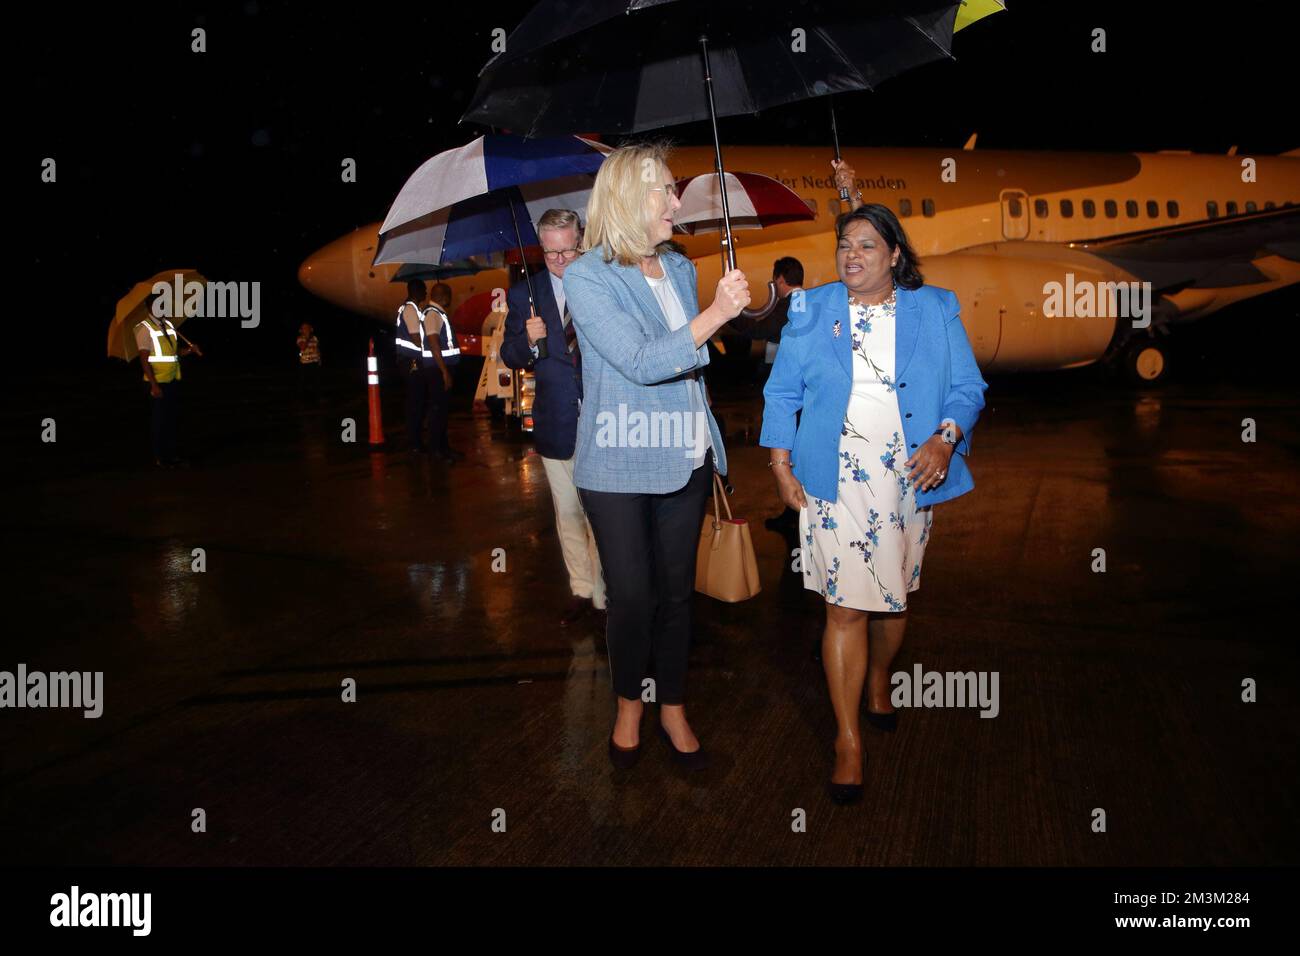 Suriname Defense Ministry Krishna Mathoera receives Deputy Prime Minister Kaag on arrival at the airport, who is in Suriname for consultations with the Surinamese government about the intentions of the Dutch state to apologize for the slavery past on Thursday, December 15, 2022. ANP RANU ABHELAKH netherlands out - belgium out Credit: ANP/Alamy Live News Stock Photo